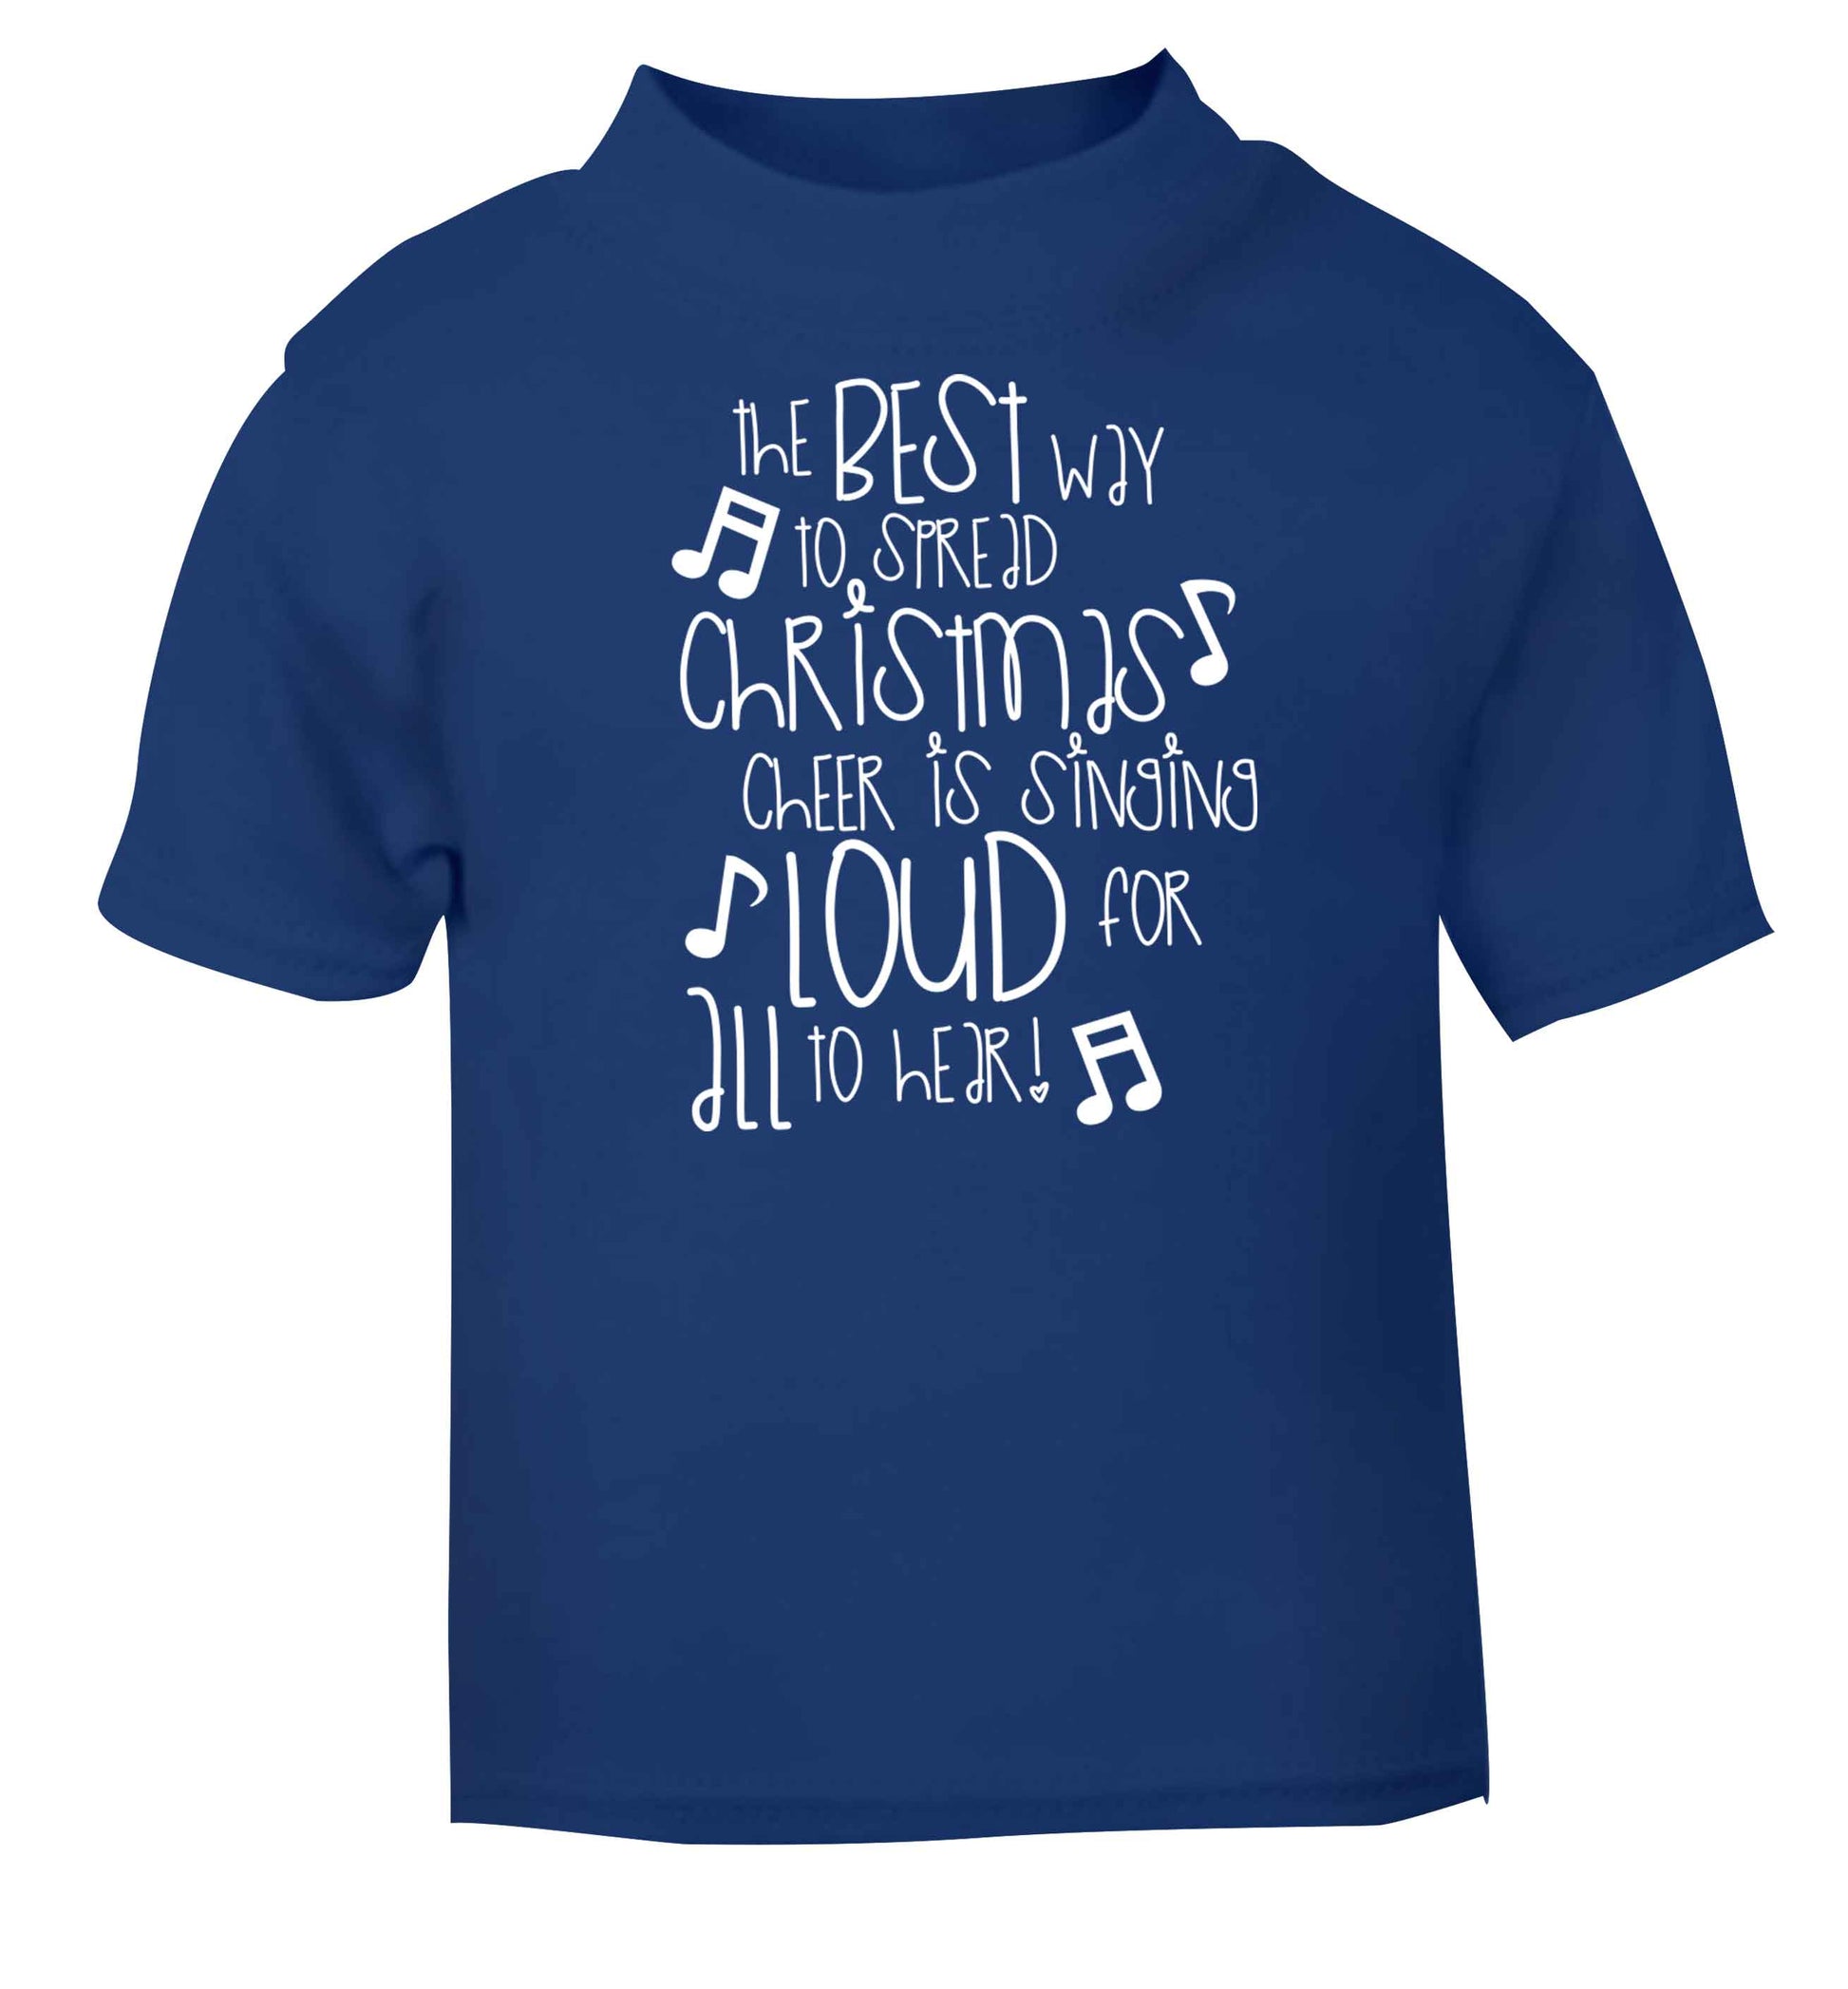 The best way to spread Christmas cheer is singing loud for all to hear blue baby toddler Tshirt 2 Years